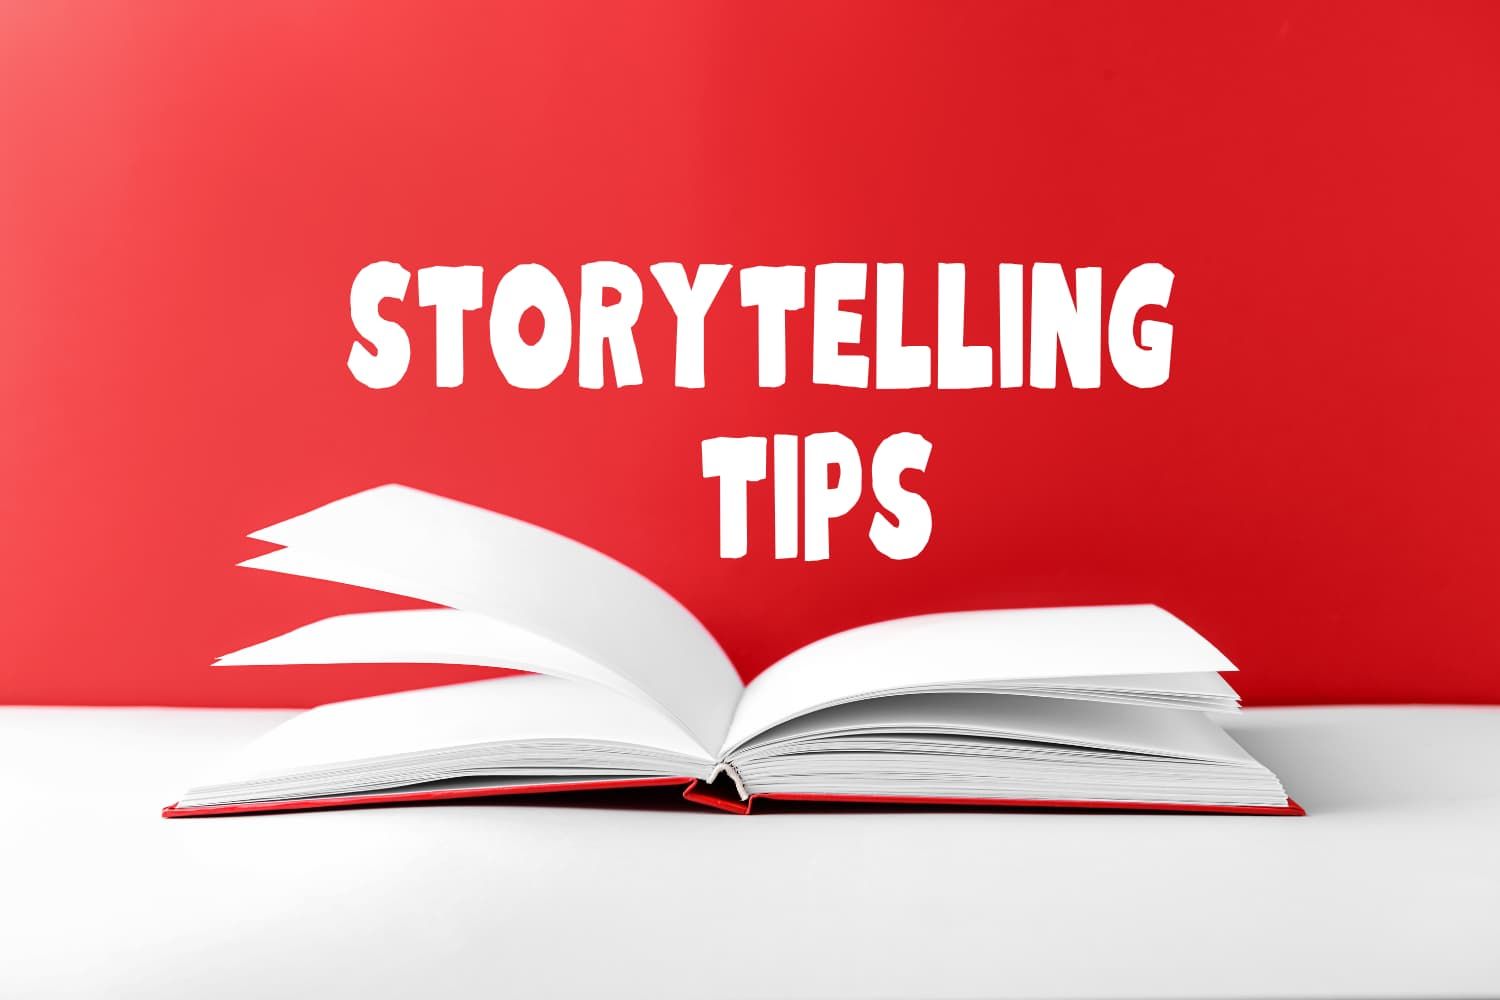 Storytelling%20tips%20-%20NT%20The%20pharisee%20and%20the%20tax%20collector%20-%20Teaching%20the%20parable%20of%20the%20tax%20collector%20and%20pharisee-bb2ec4e5 Jesus (of Nazareth)